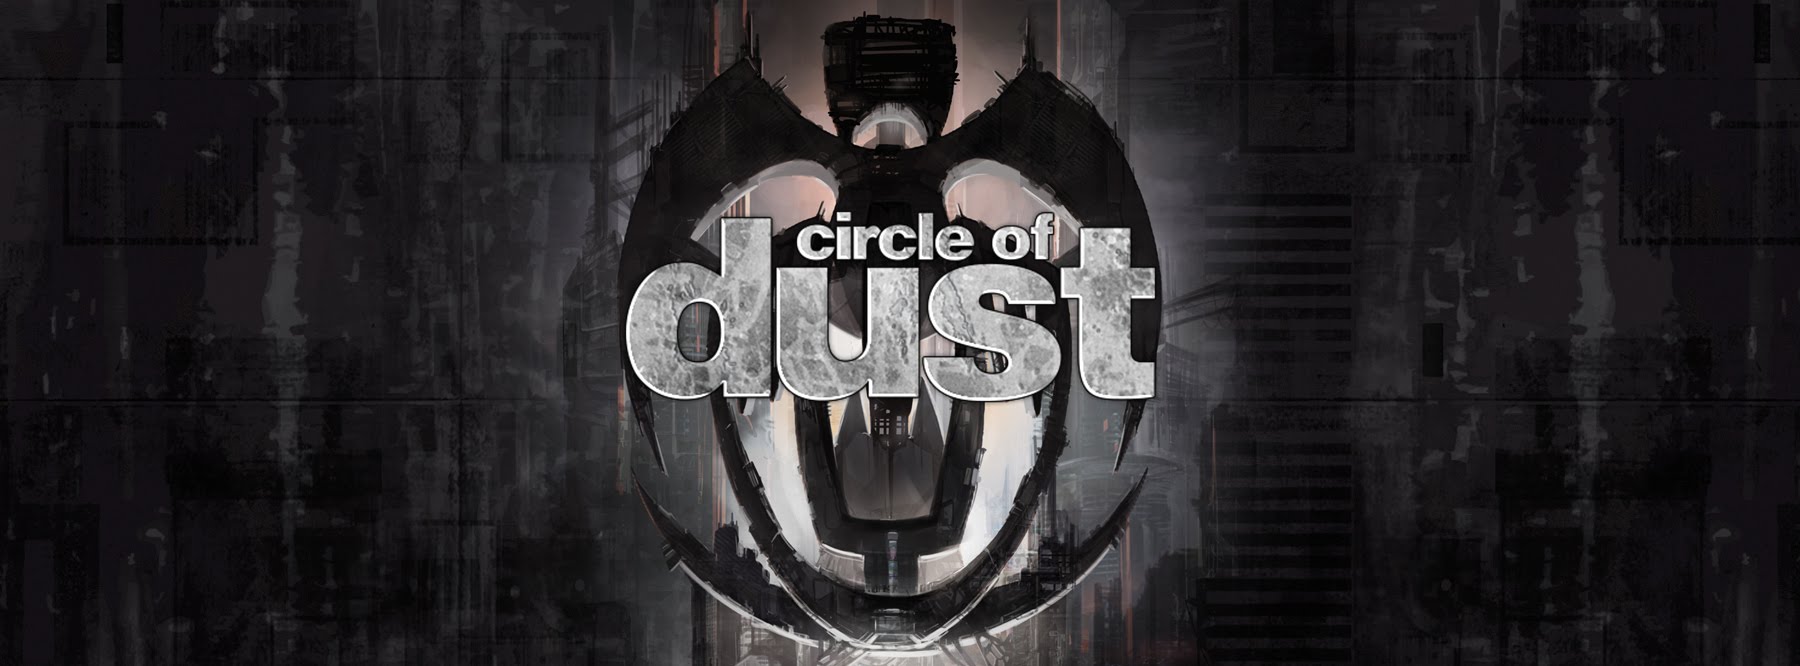 Amazing Circle Of Dust Pictures & Backgrounds